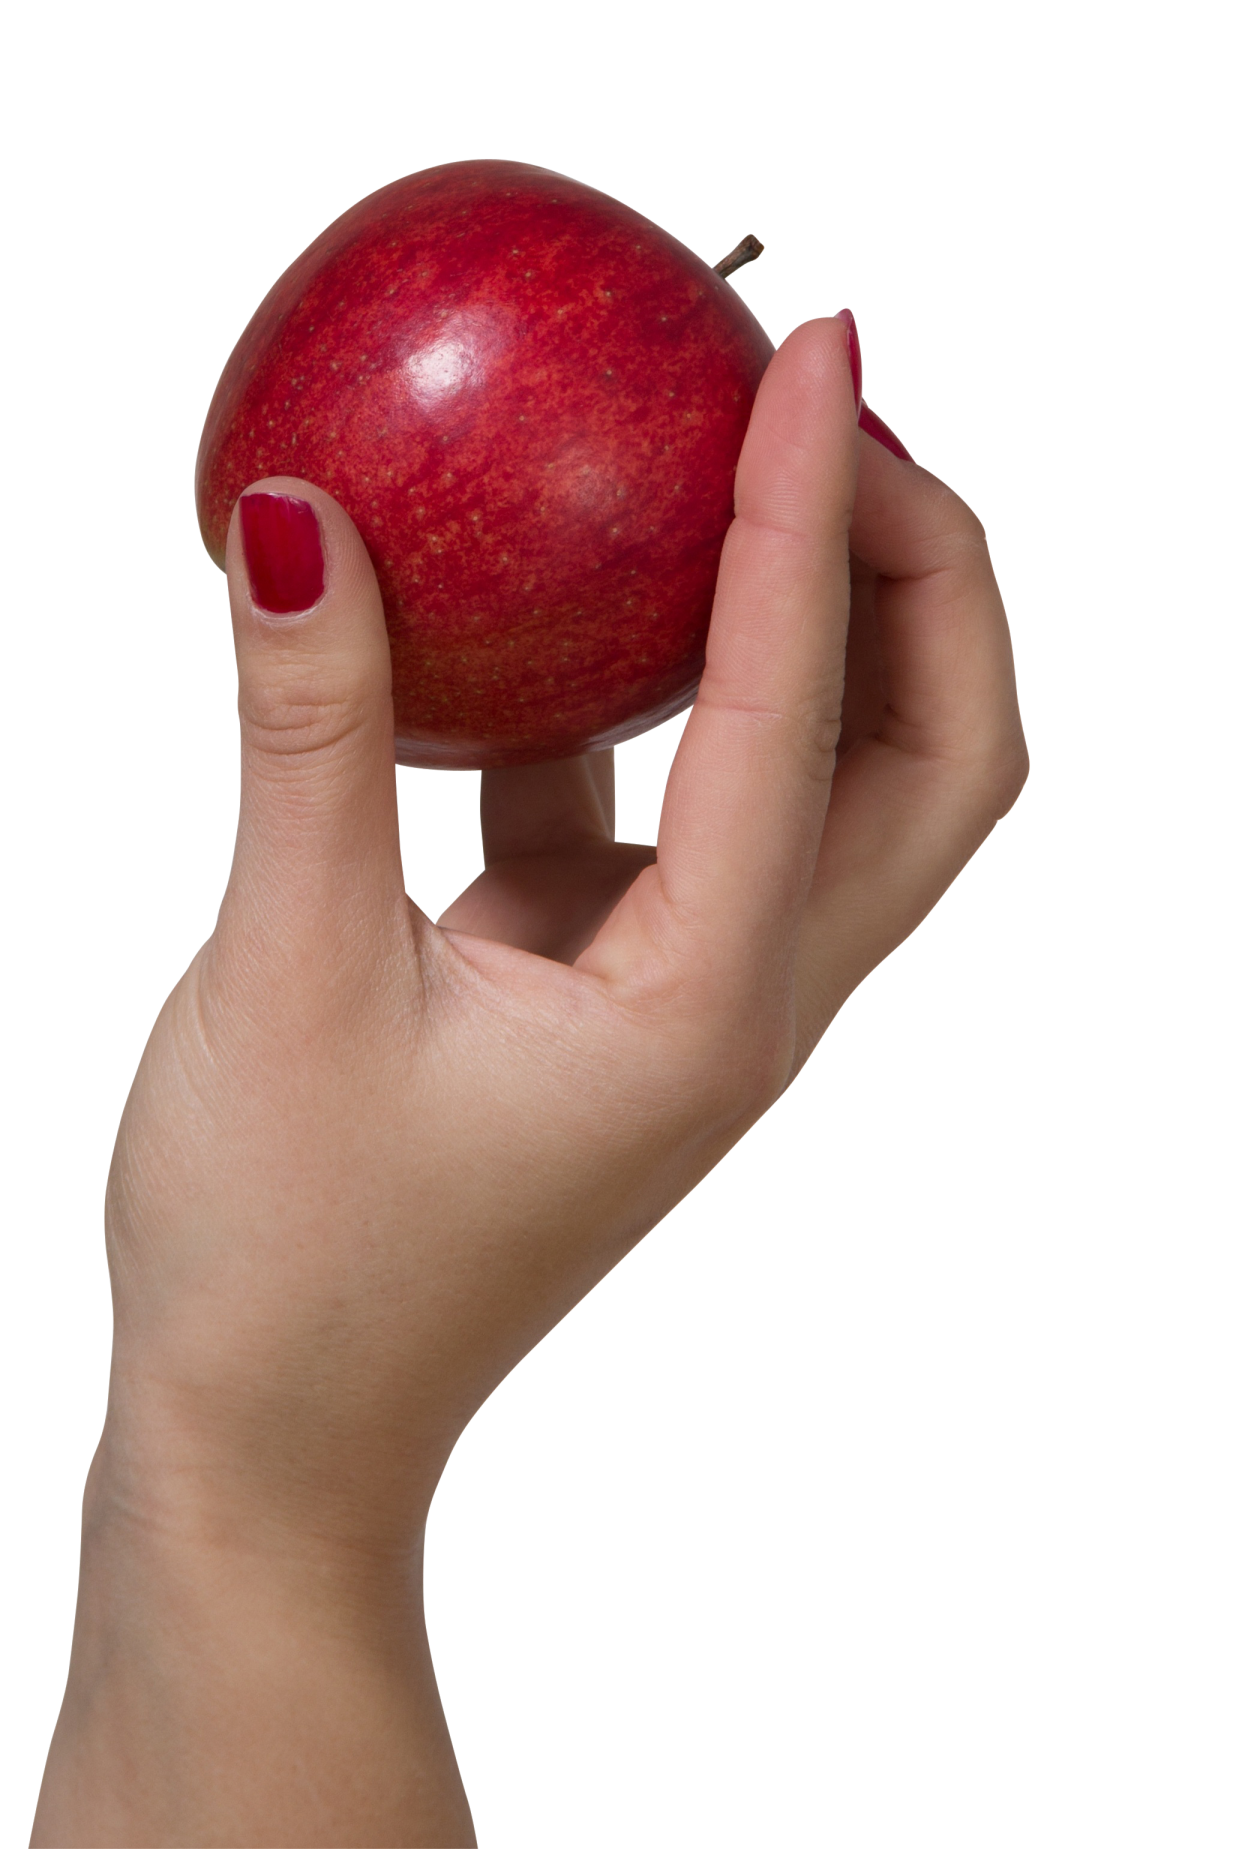 Apple in hand